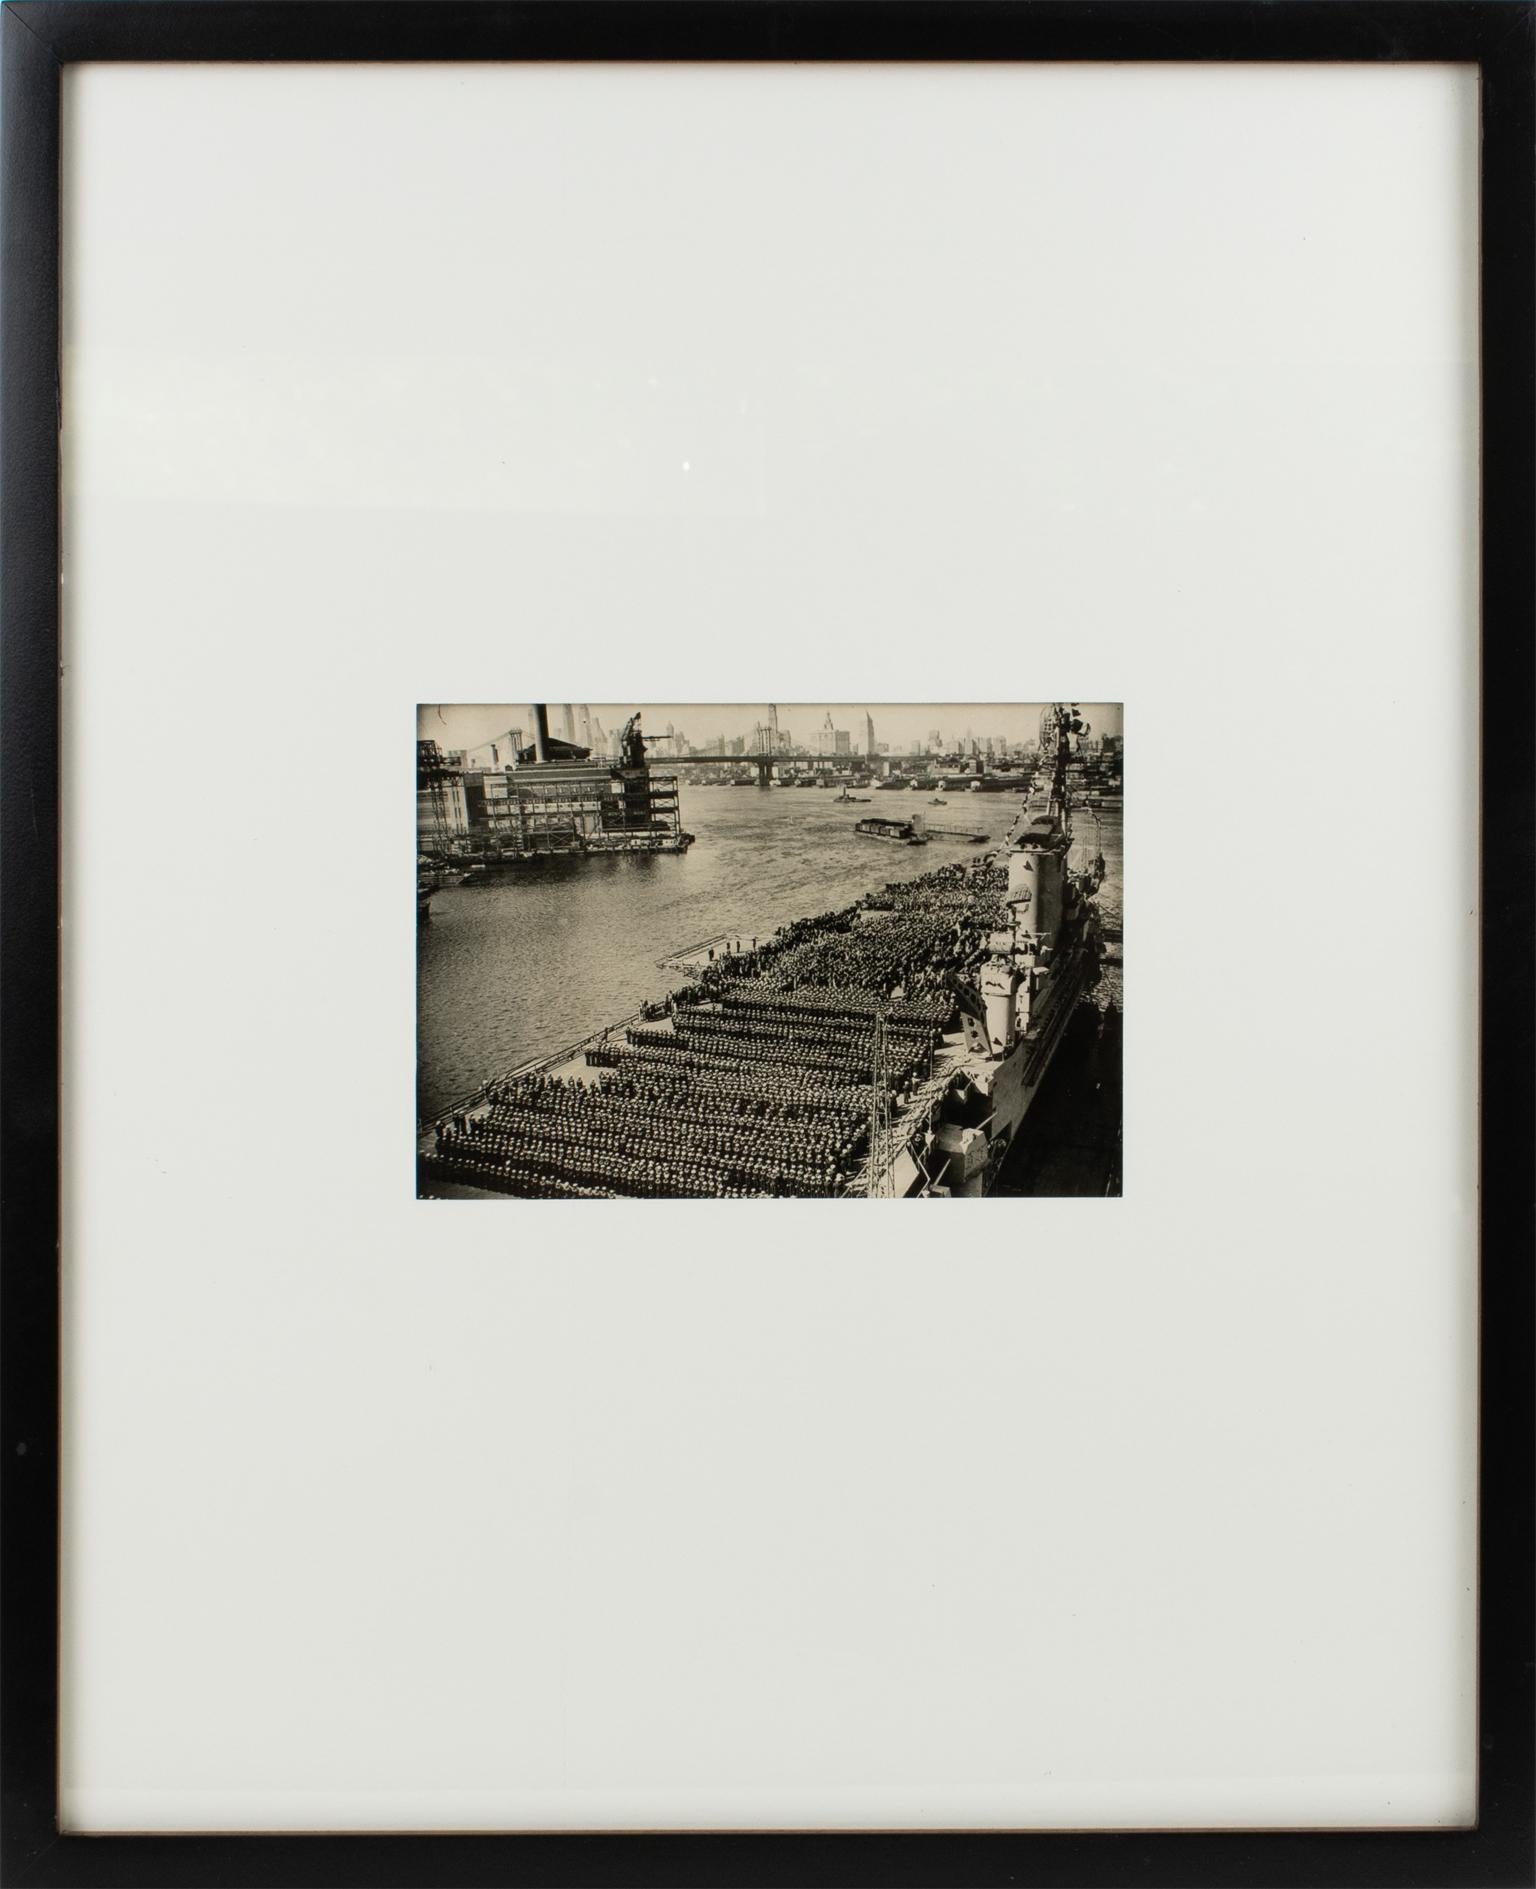 An original silver gelatin black and white photograph by Associated Press Photo. The USS Roosevelt aircraft carriers on the Hudson River, New York, during Navy Day in 1945.
Features:
Original Silver Gelatin Print Photography framed.
Press